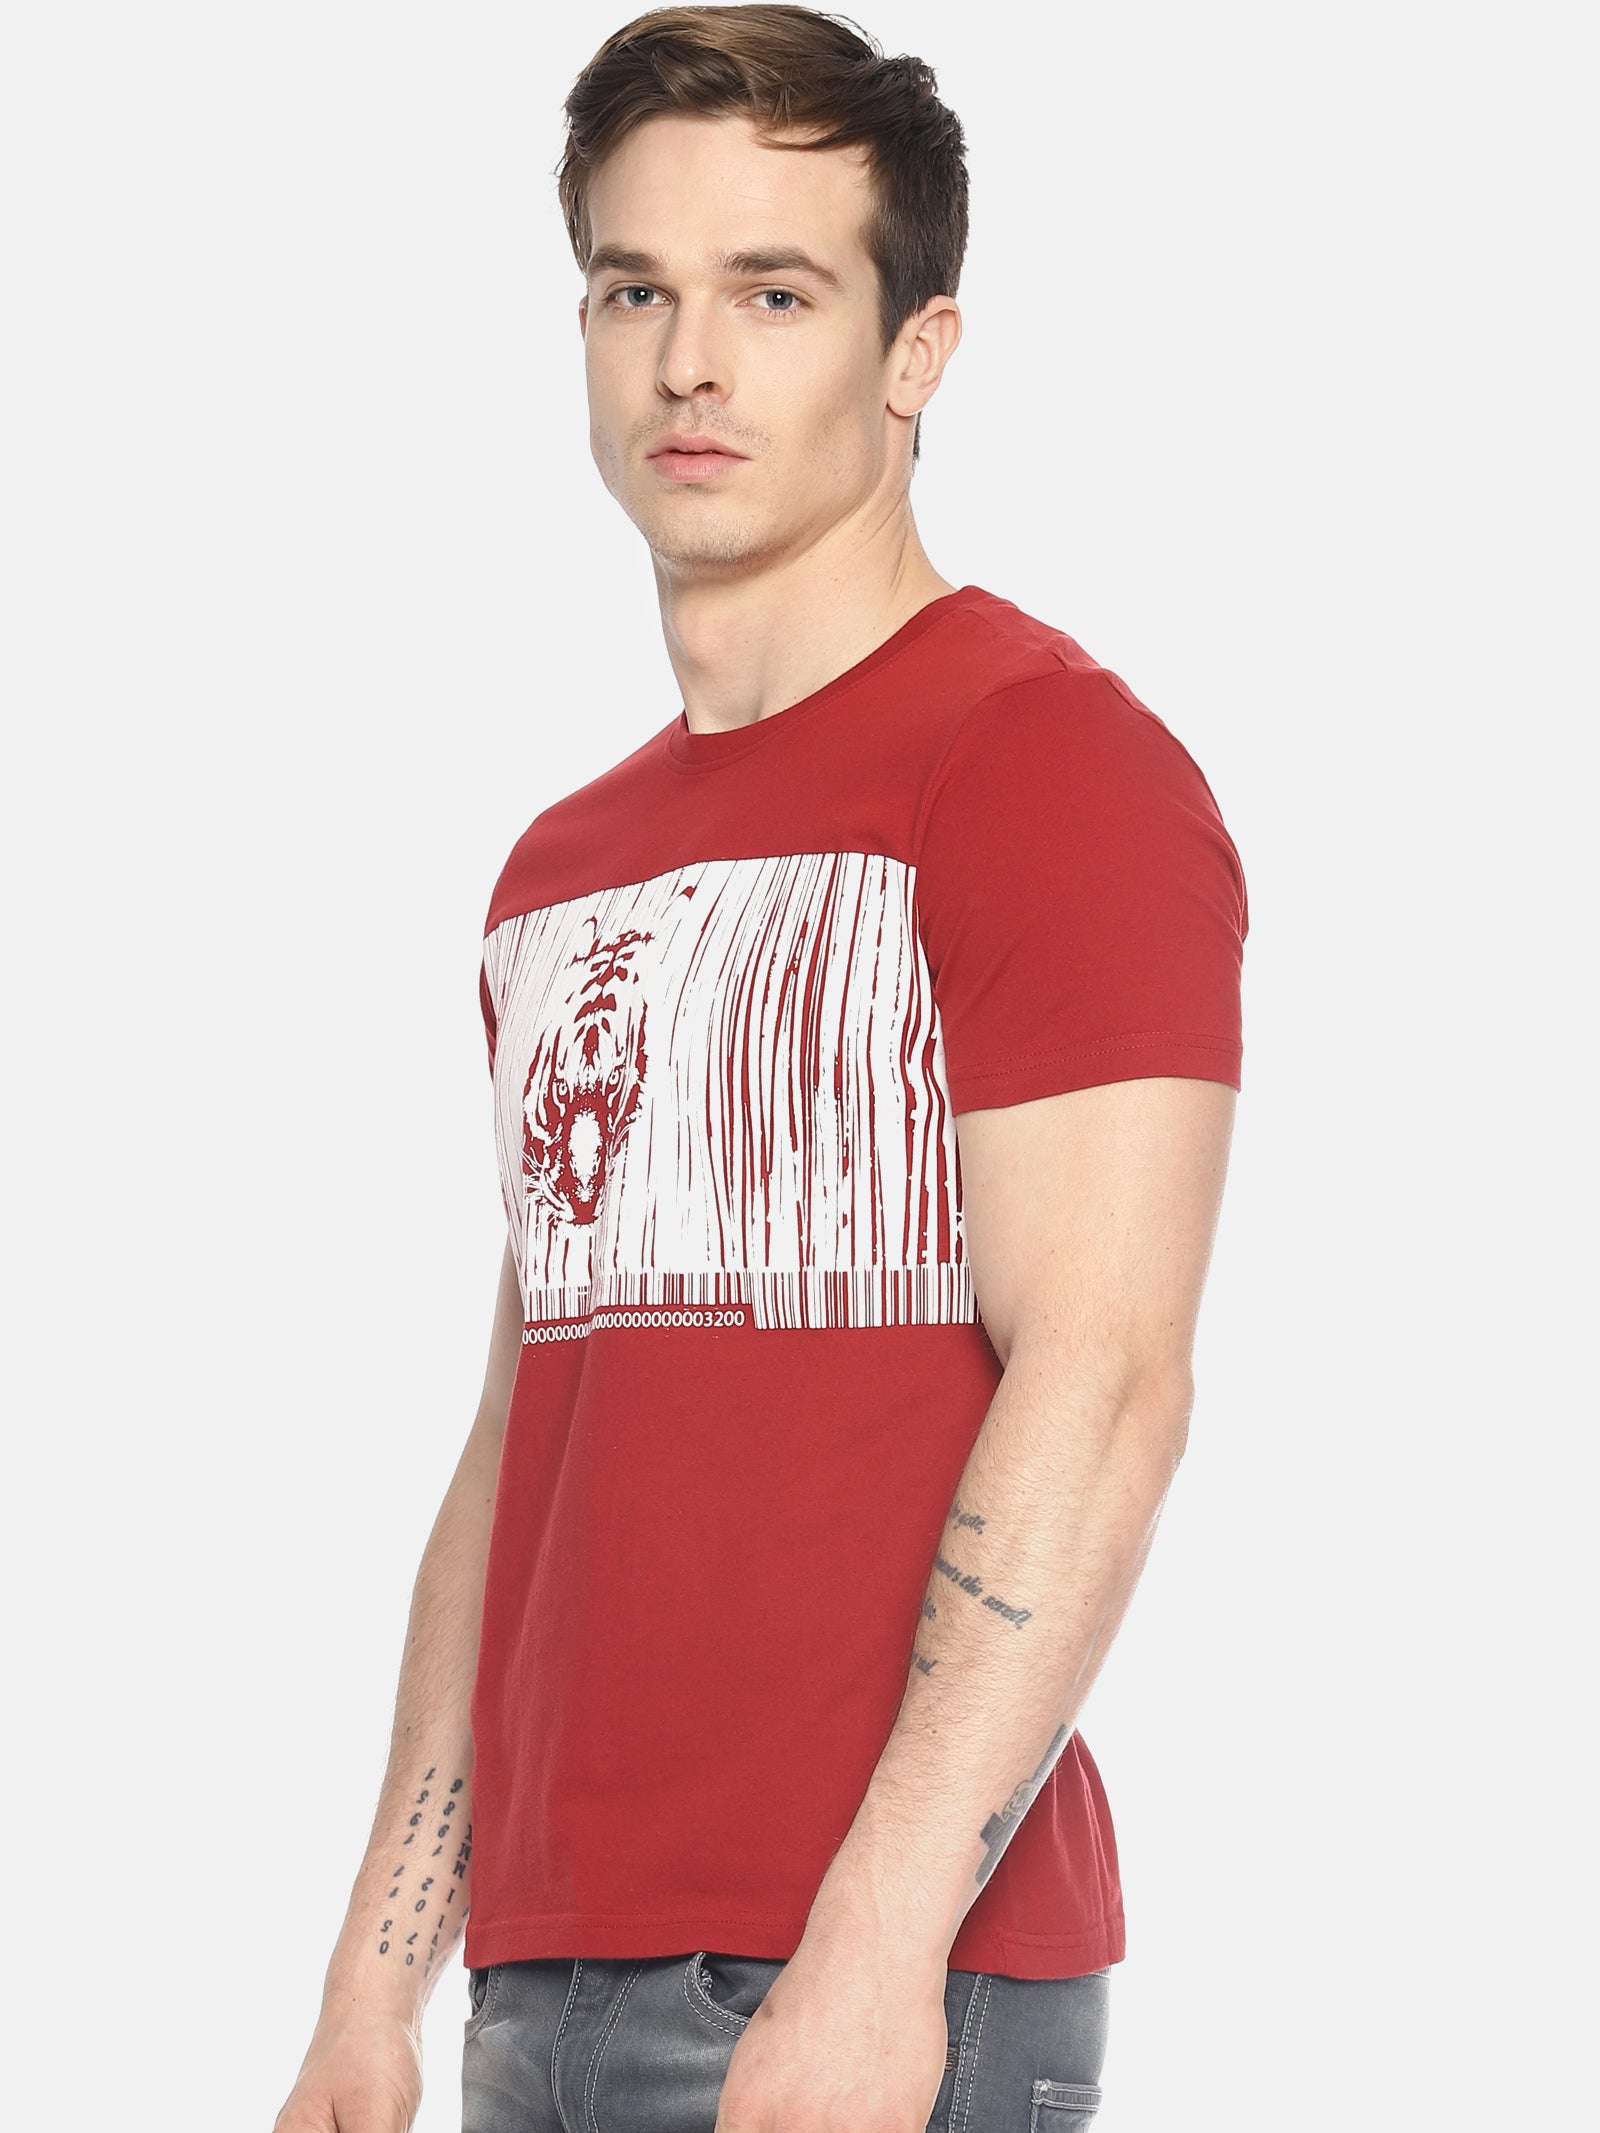 Wolfpack Round Neck Barcode Tiger Printed Red T-Shirt Wolfpack